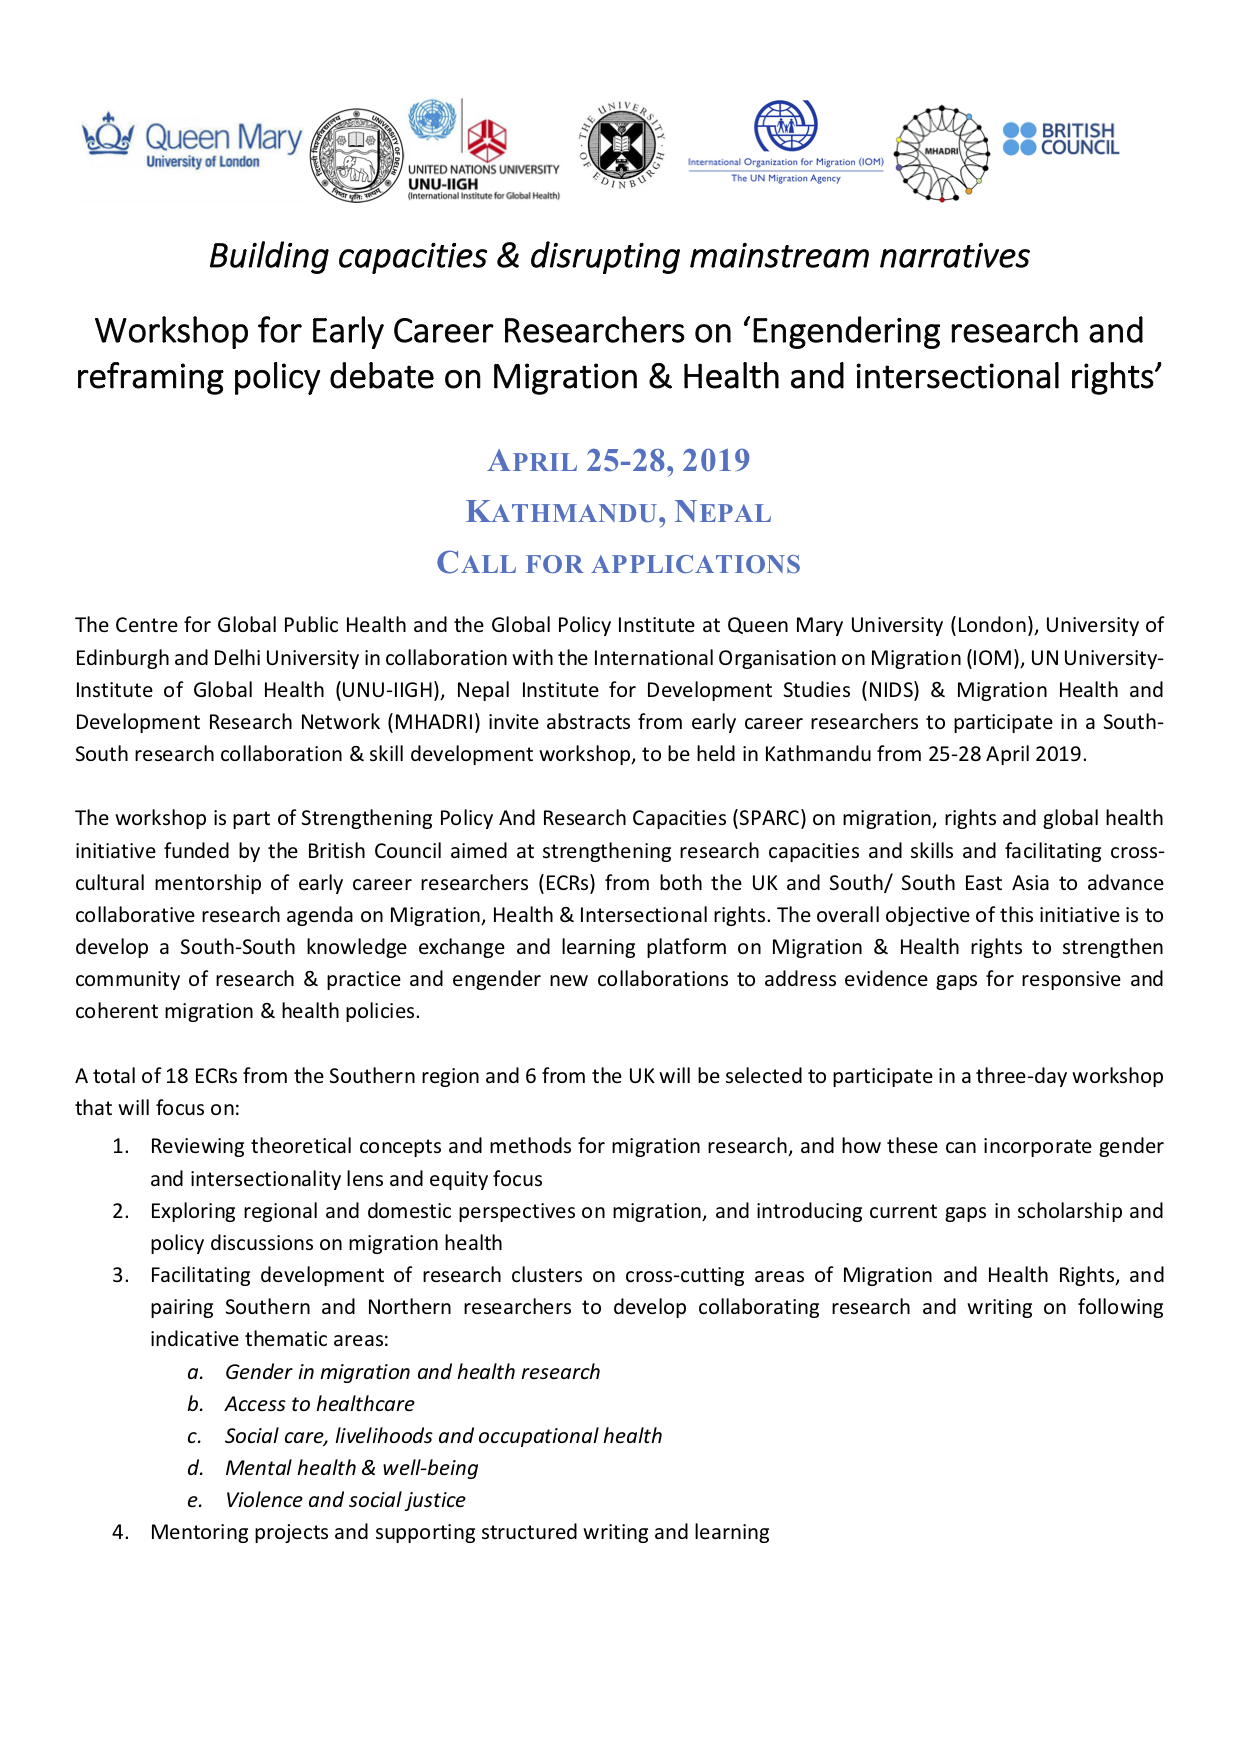 [Call for applications] Early Career Researcher Workshop – ‘Engendering research and reframing policy debate on Migration & Health and intersectional rights’